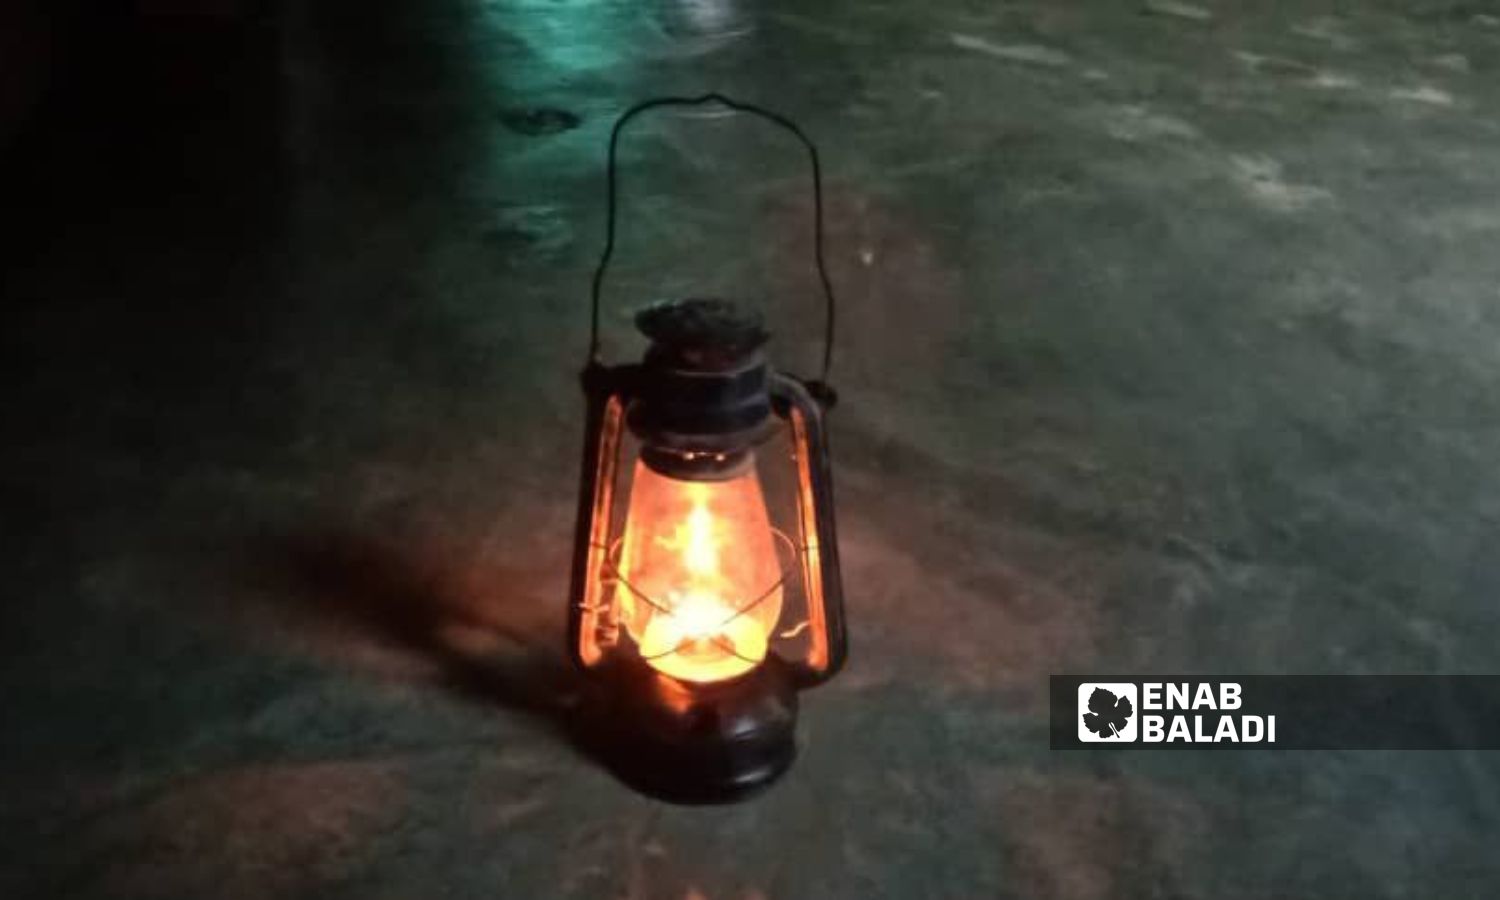 One of the means used by Deir Ezzor’s residents for lighting - December 18, 2023 (Enab Baladi/Obadah al-Sheikh)